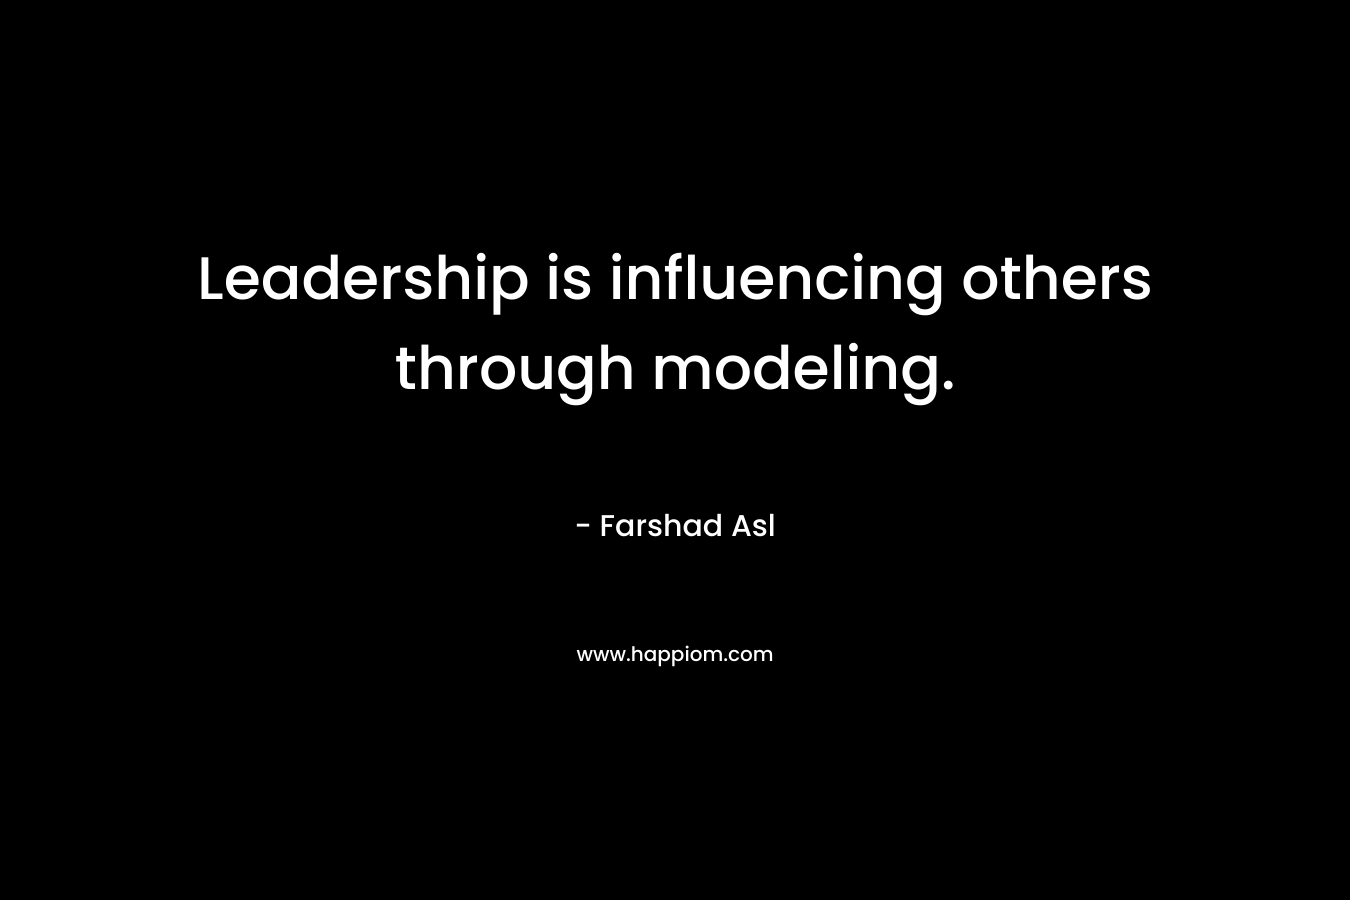 Leadership is influencing others through modeling. – Farshad Asl